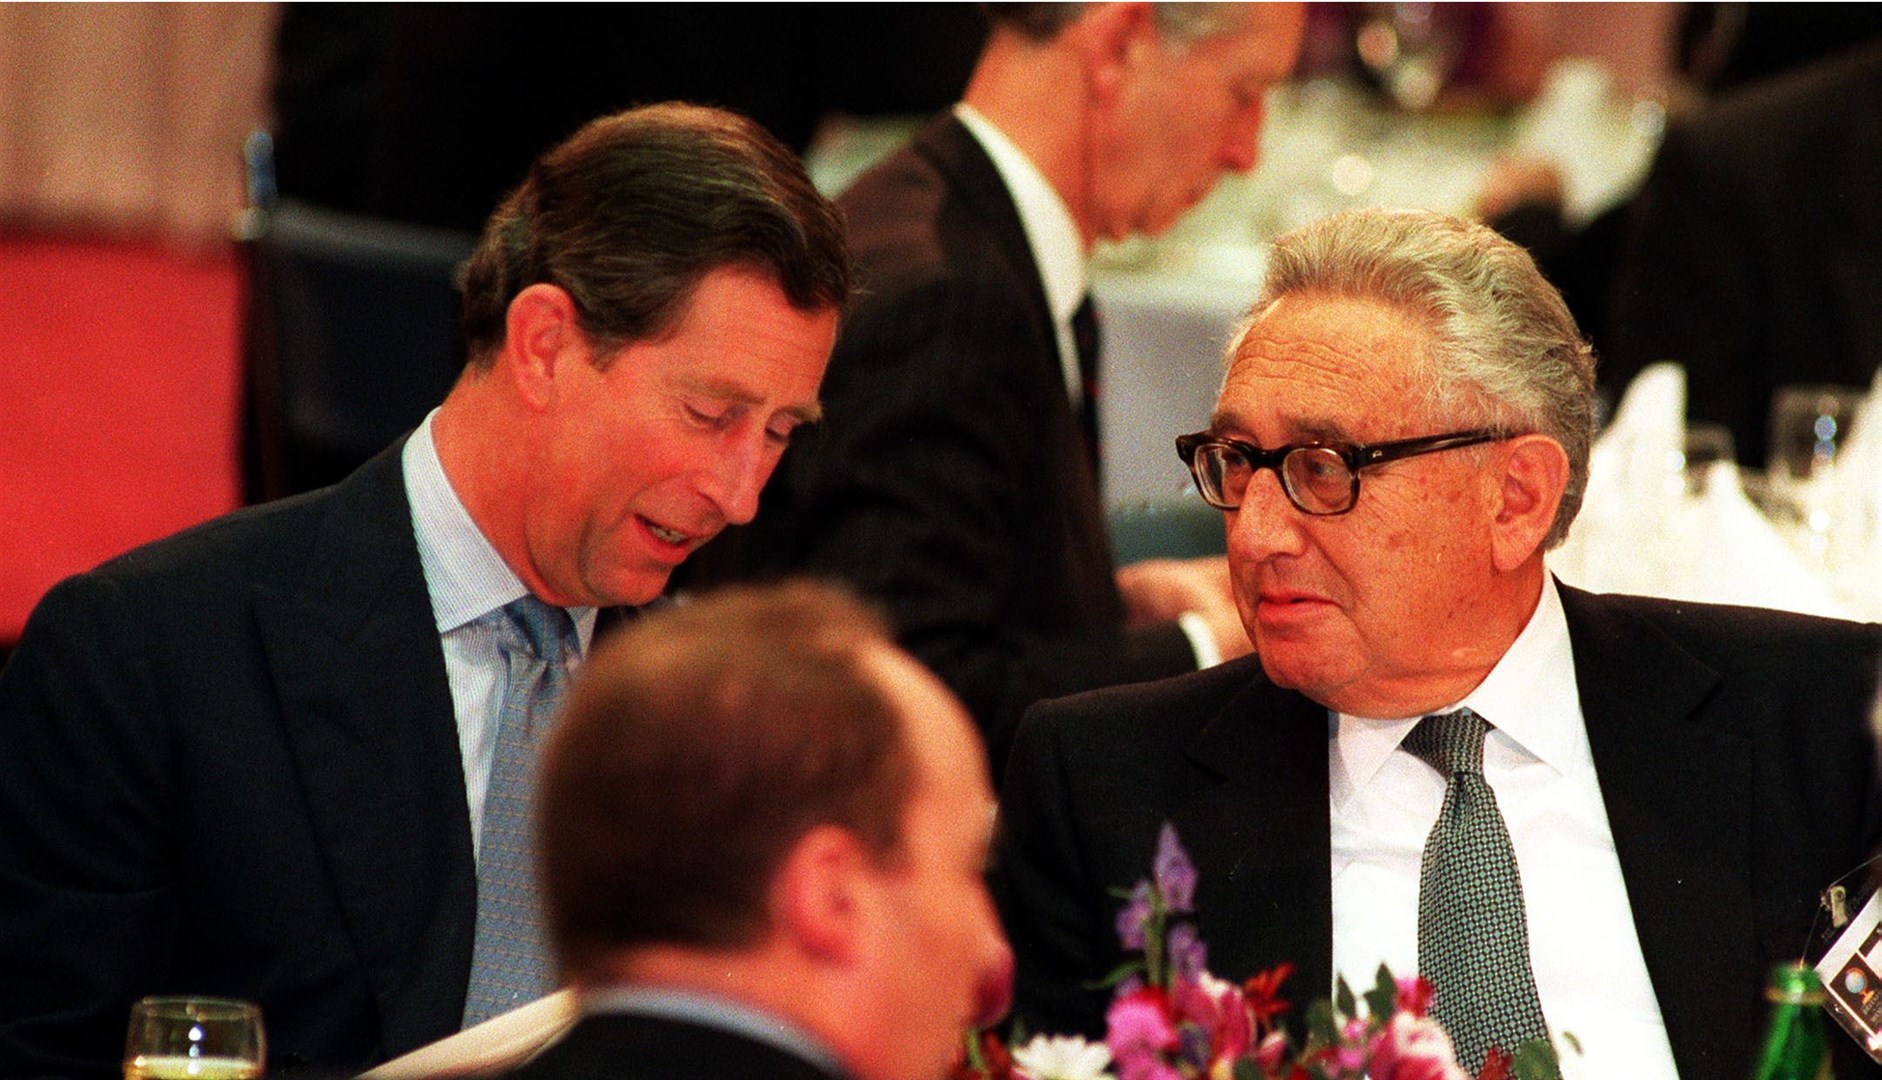 The King, who was then the Prince of Wales, talking with Mr Kissinger during a conference at the Royal Institute of International Affairs in March 1995 (PA)